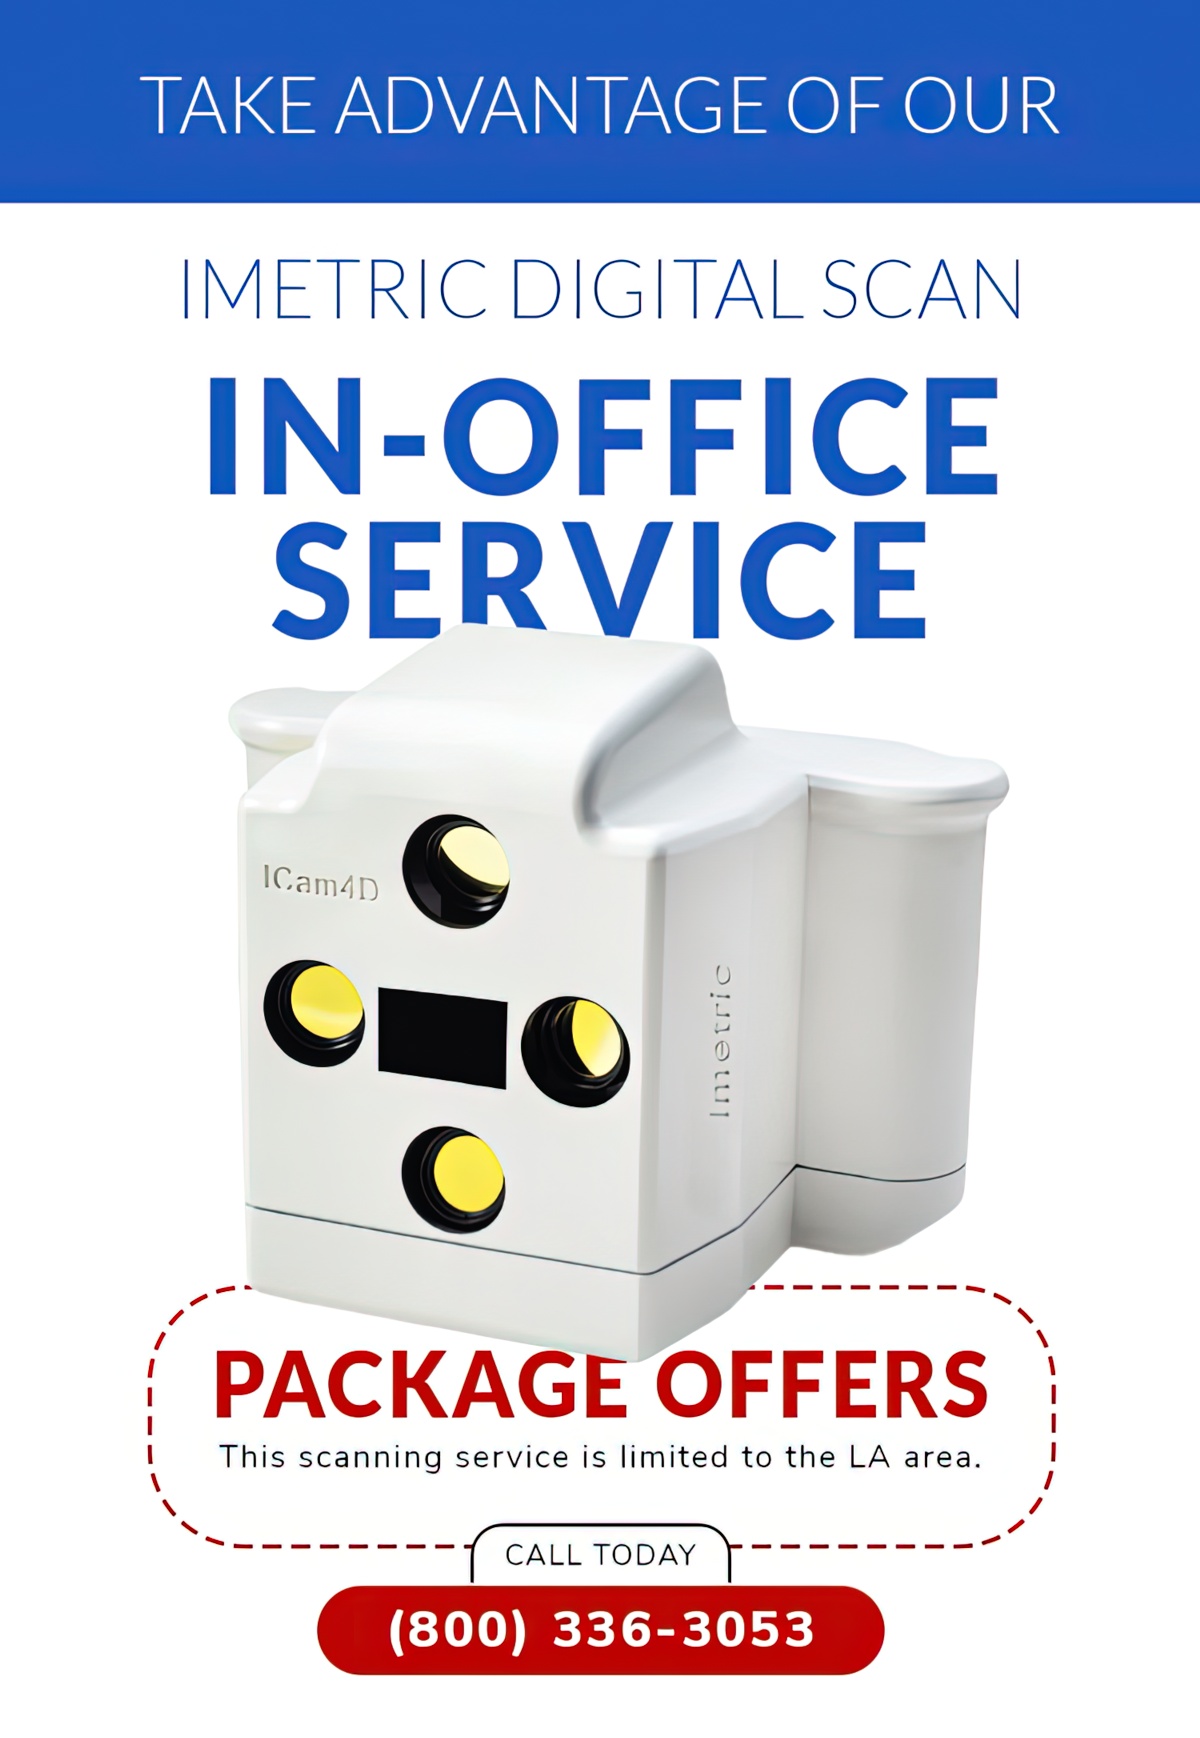 IMETRIC Digital Scan In-Office Service - LOS ANGELES AREA ONLY